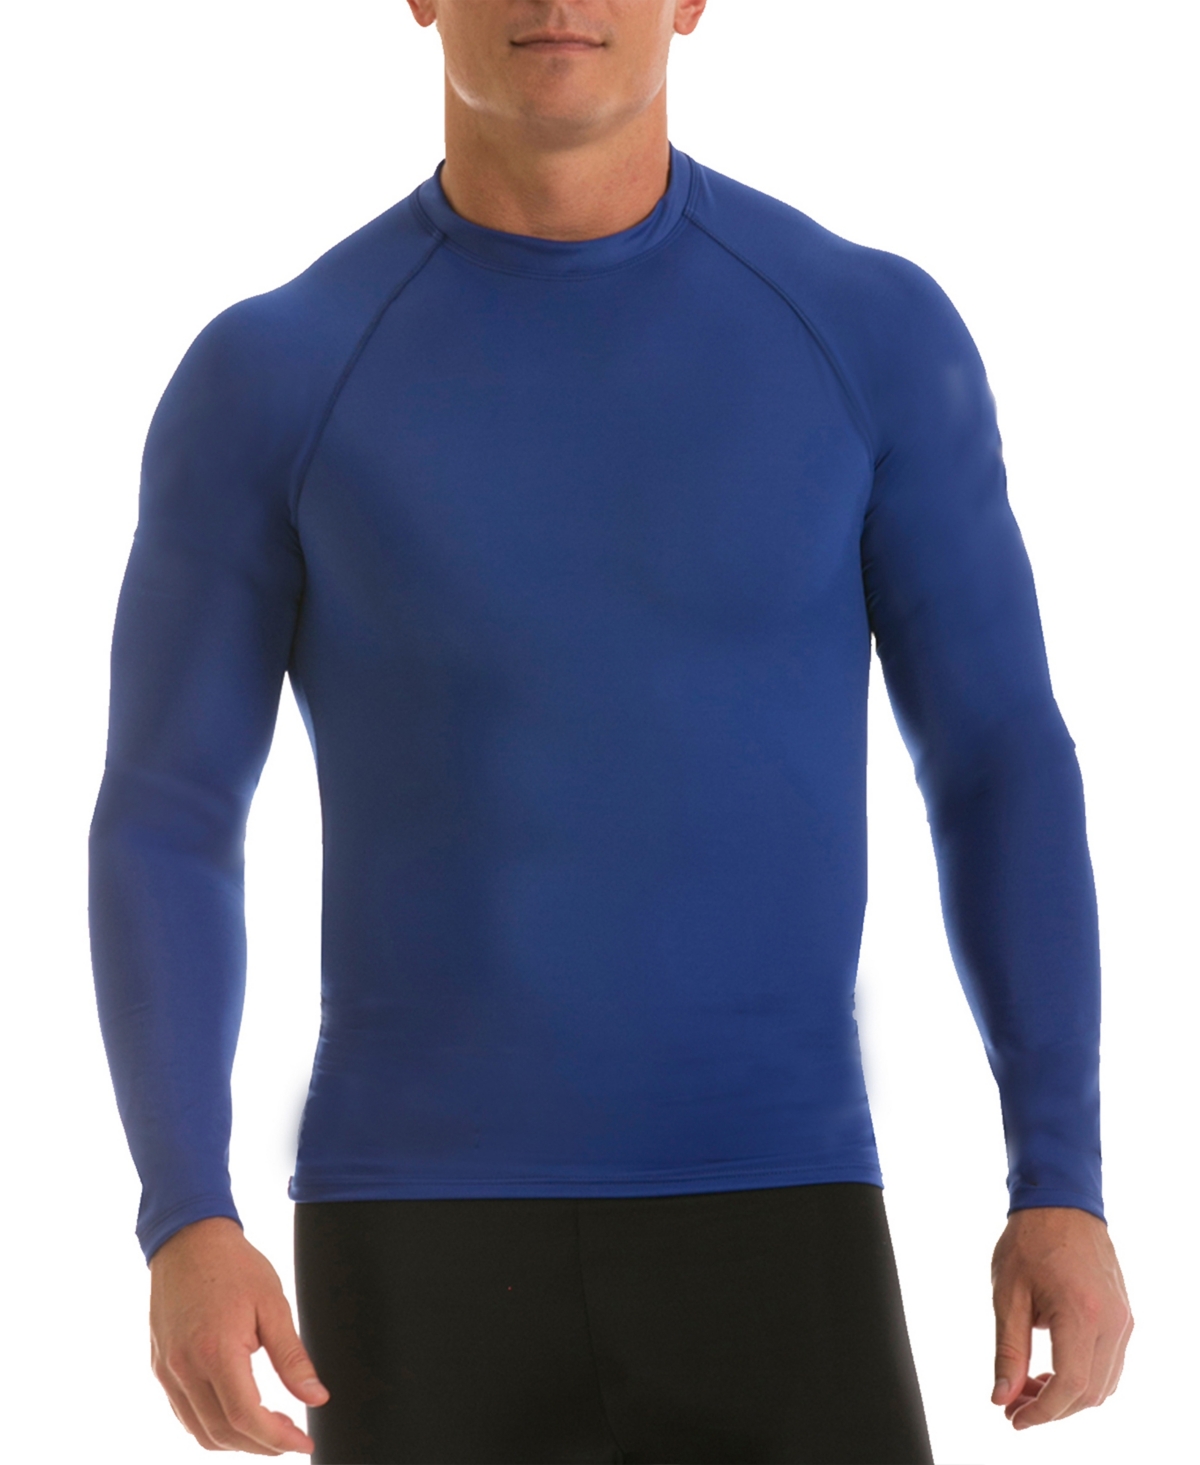 Men's Power Mesh Compression Muscle Tank Top - Royal